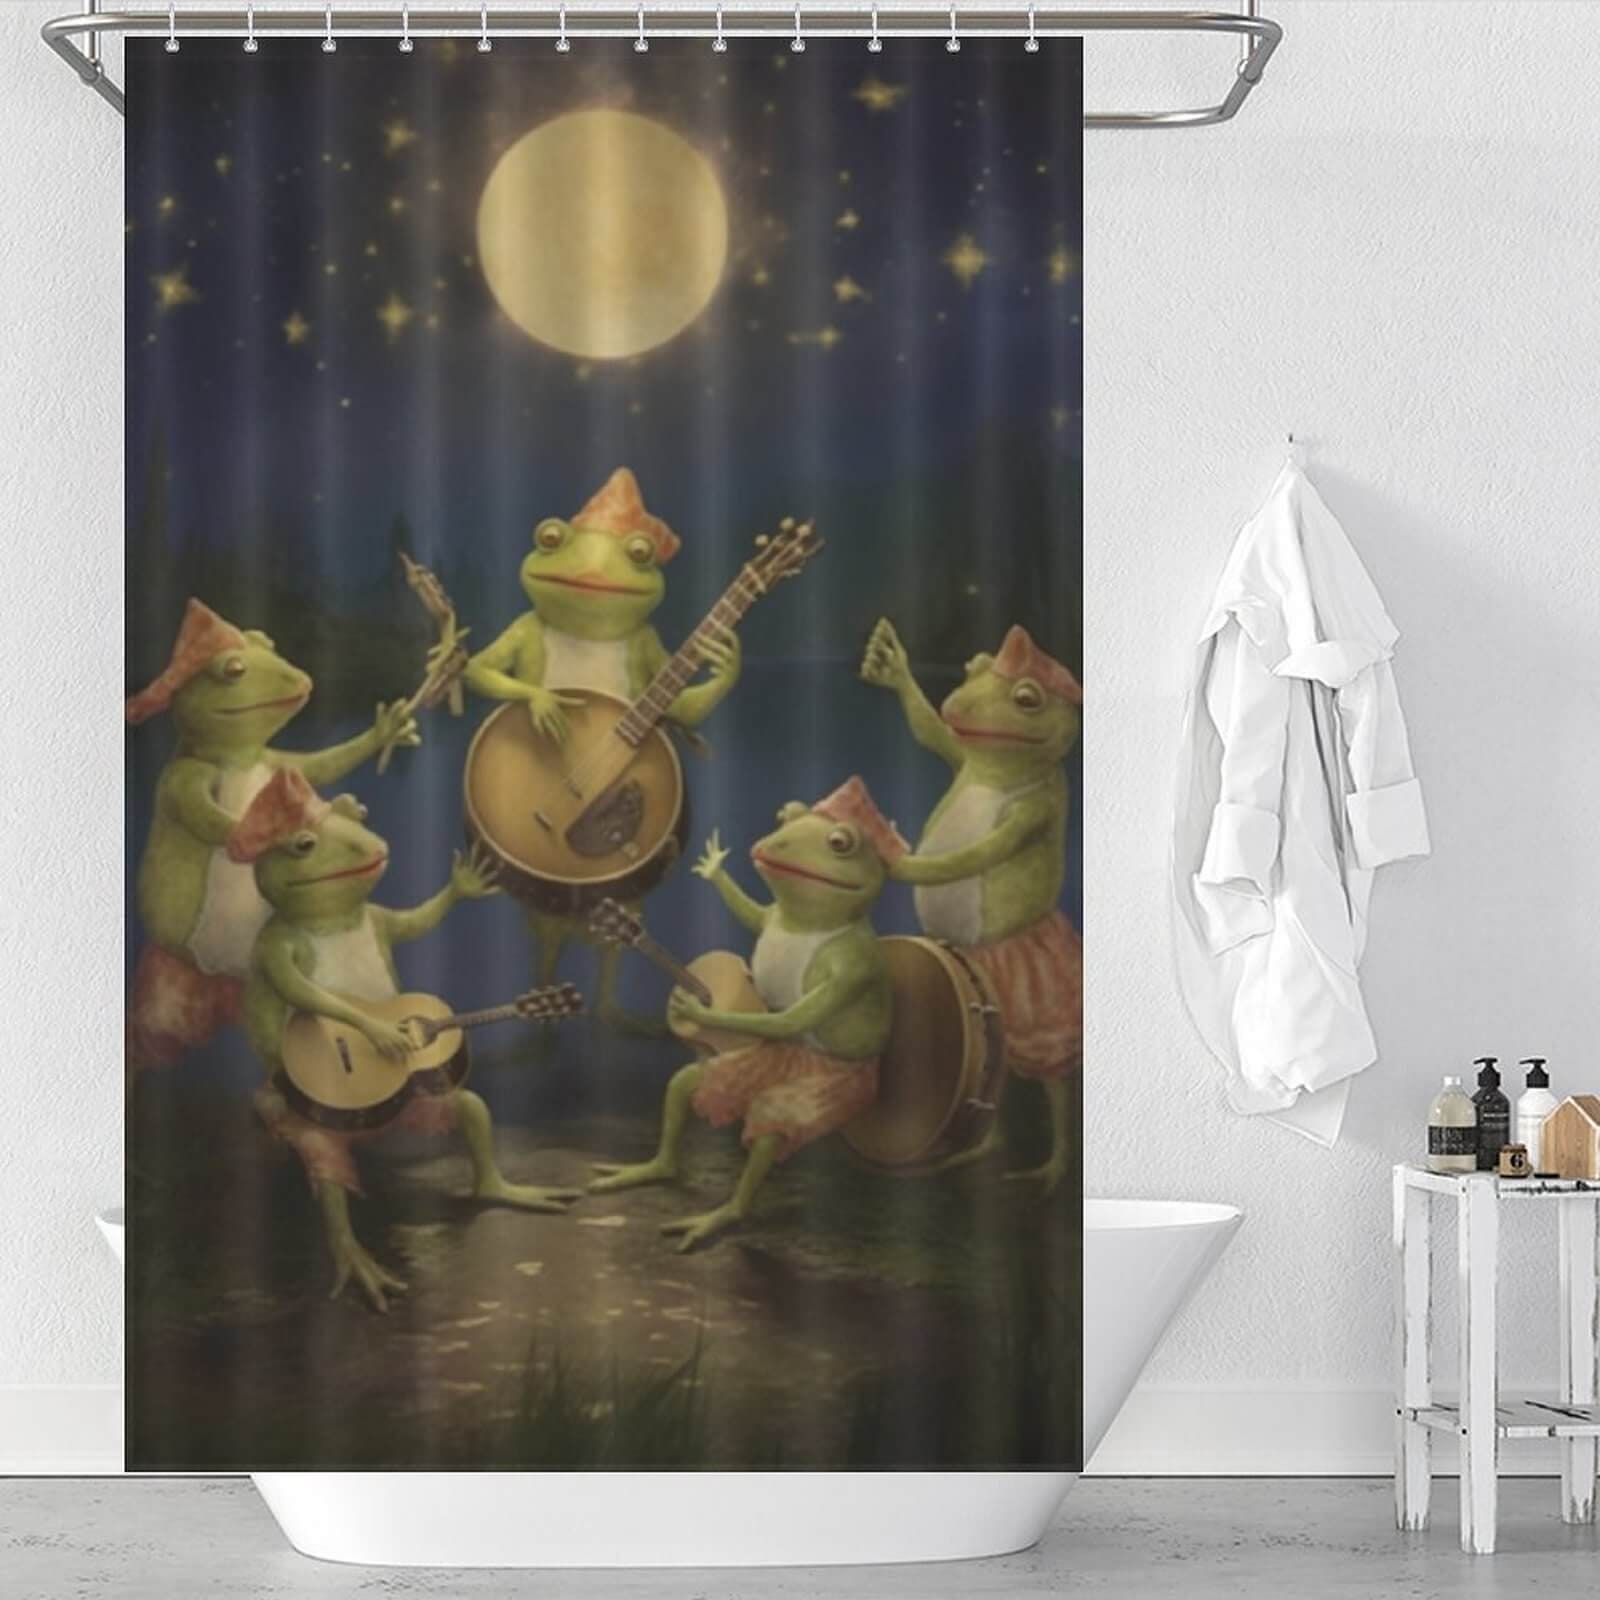 Dancing Frogs Shower Curtain, Funny Frog Performed Moon Bathroom